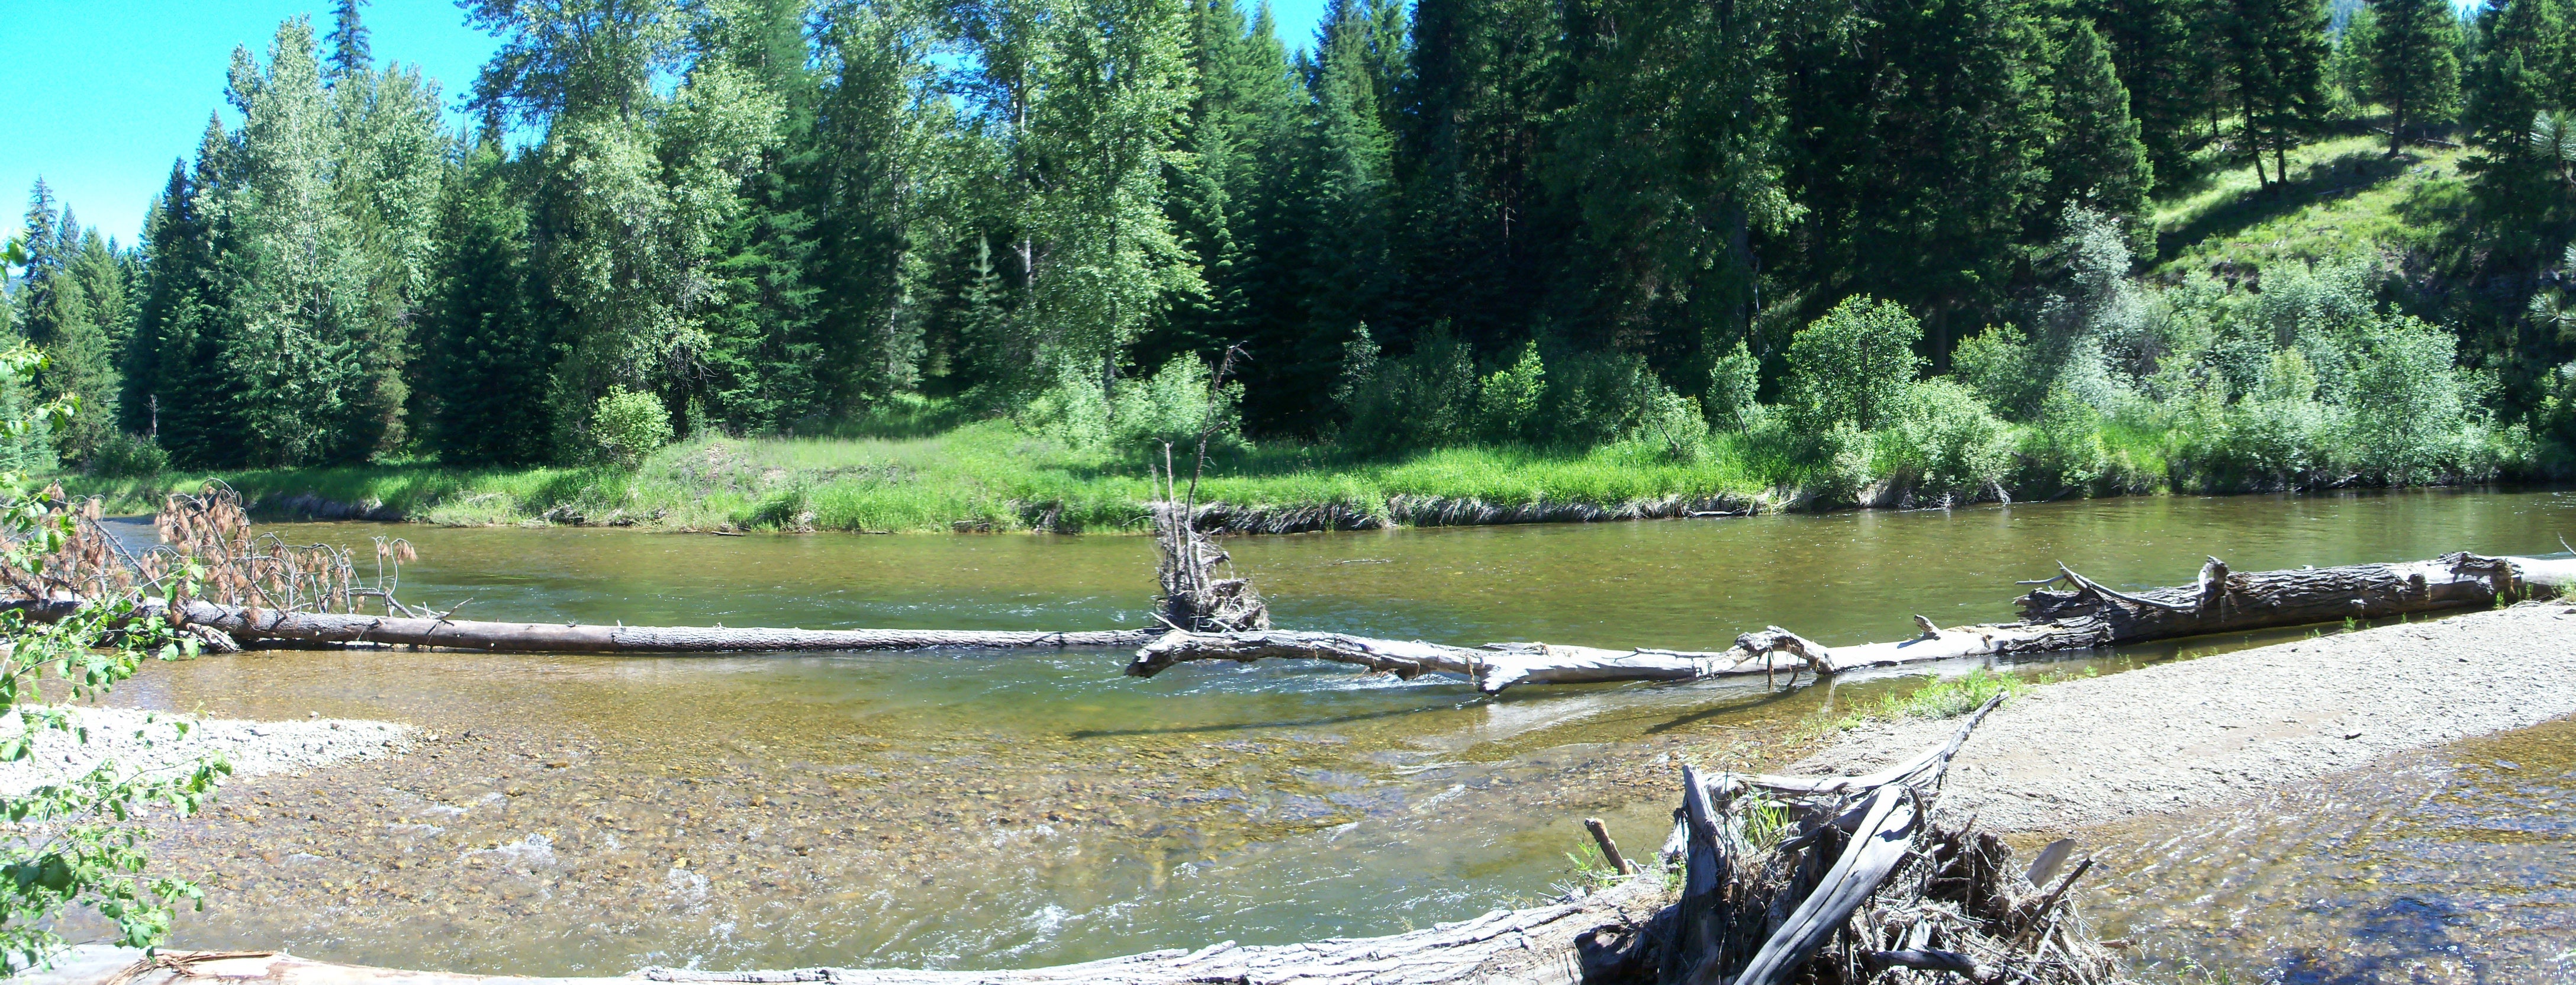 Fisher River Pano